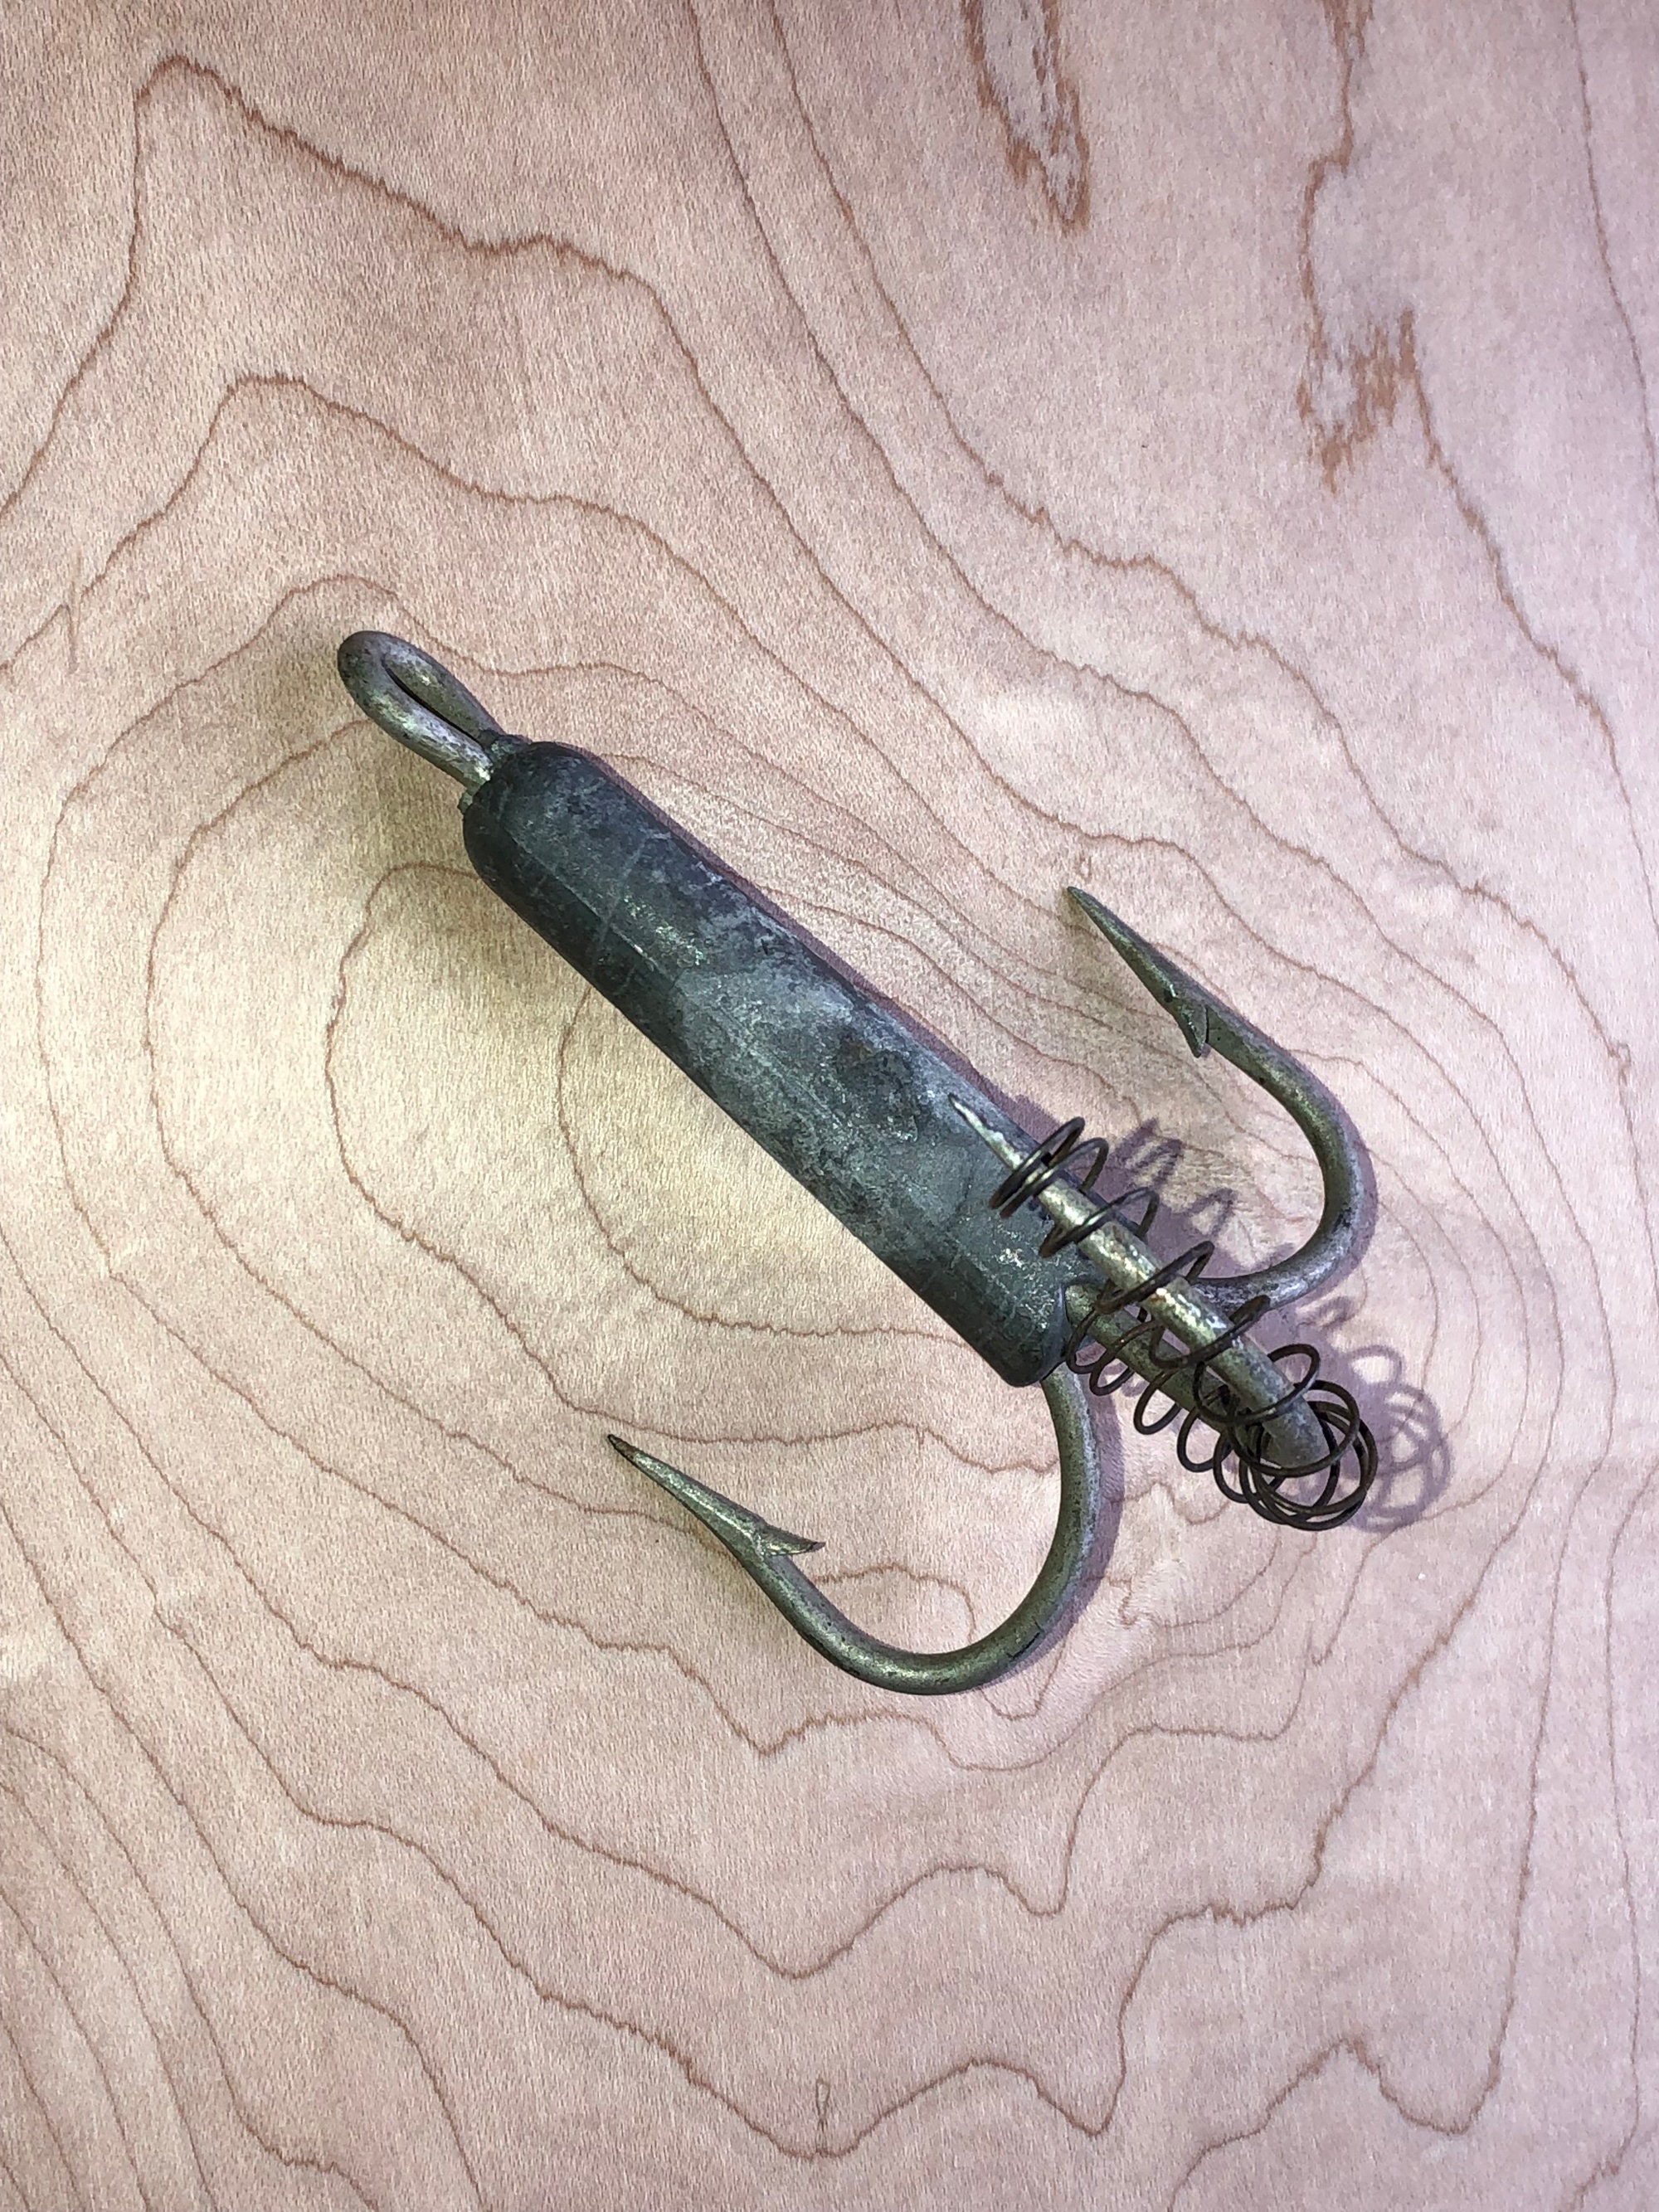 Fishing Lures Scorpion, South Bend, and Tony Accetta 